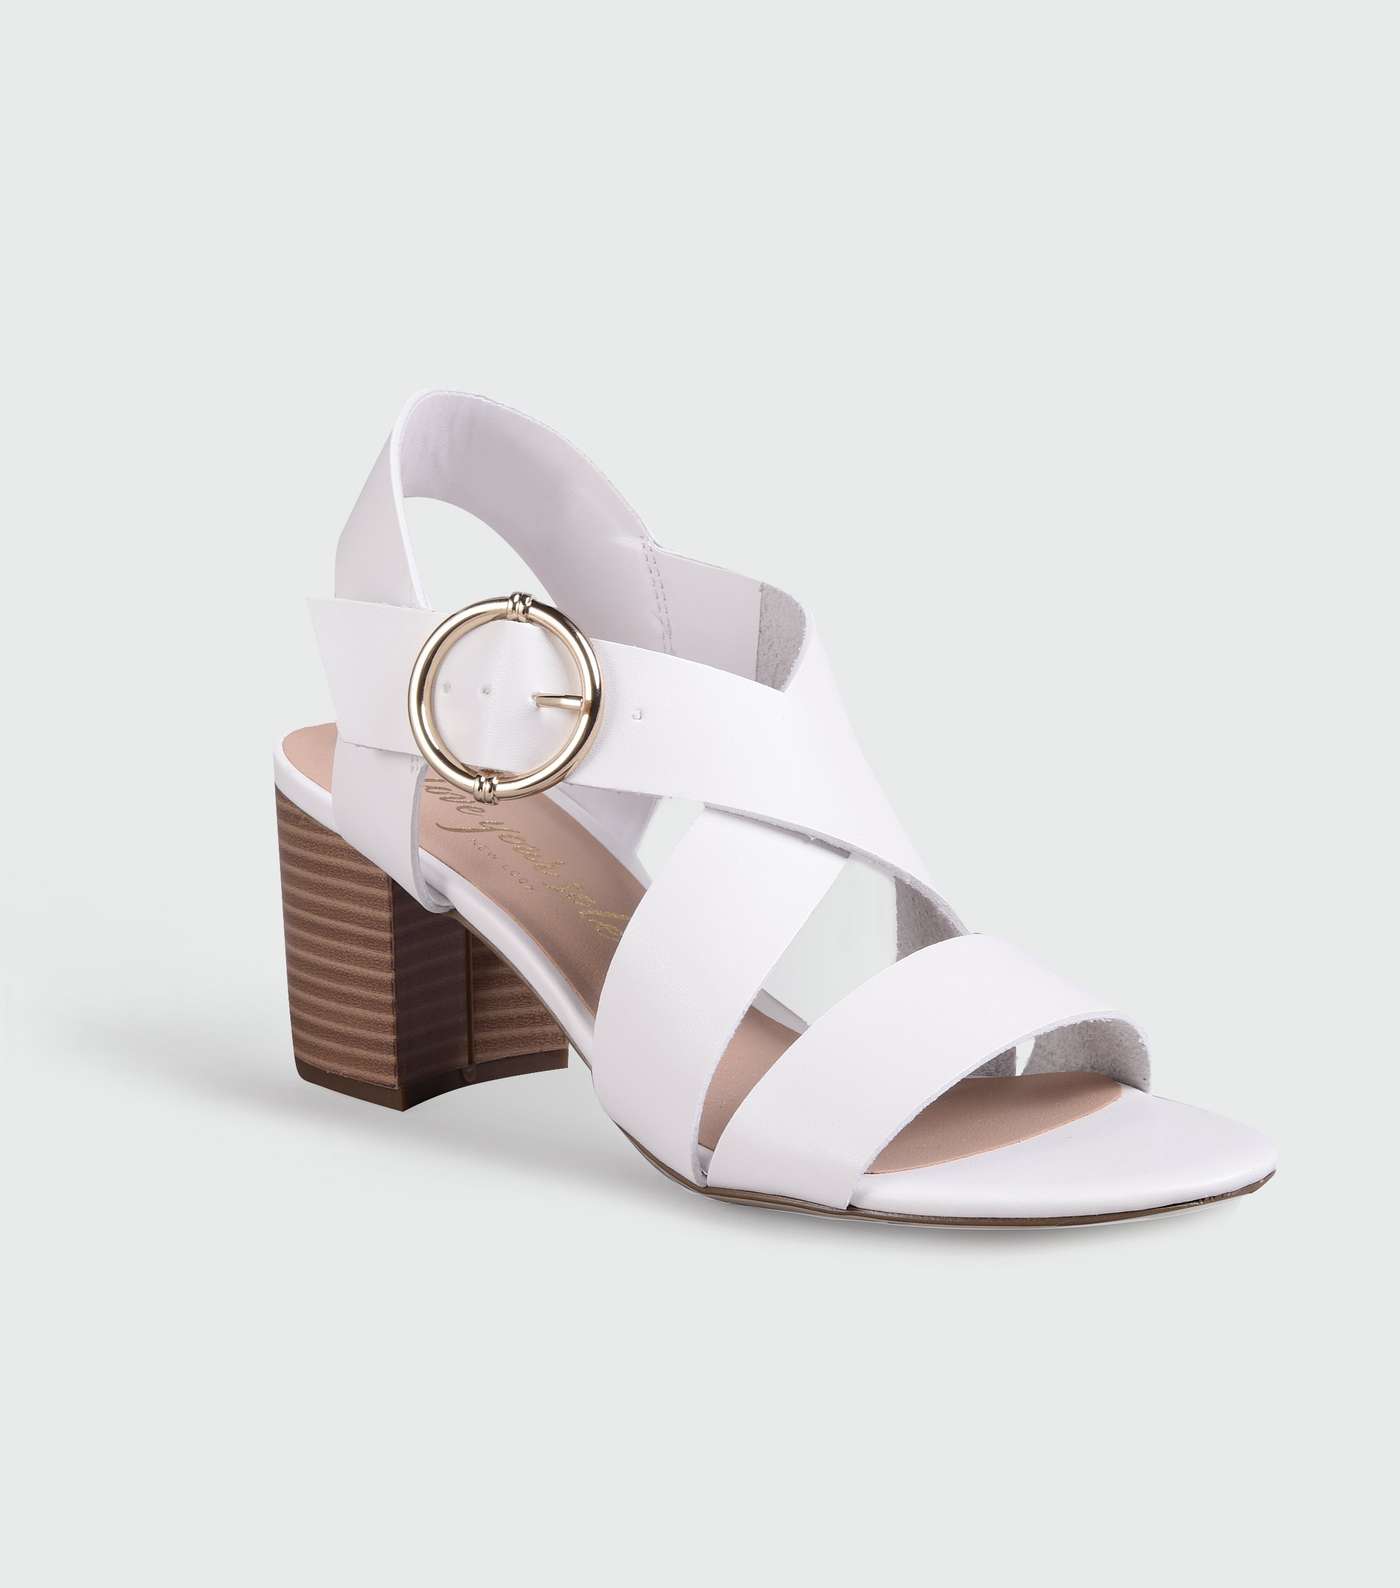 White Leather-Look Strappy Block Heel Sandals